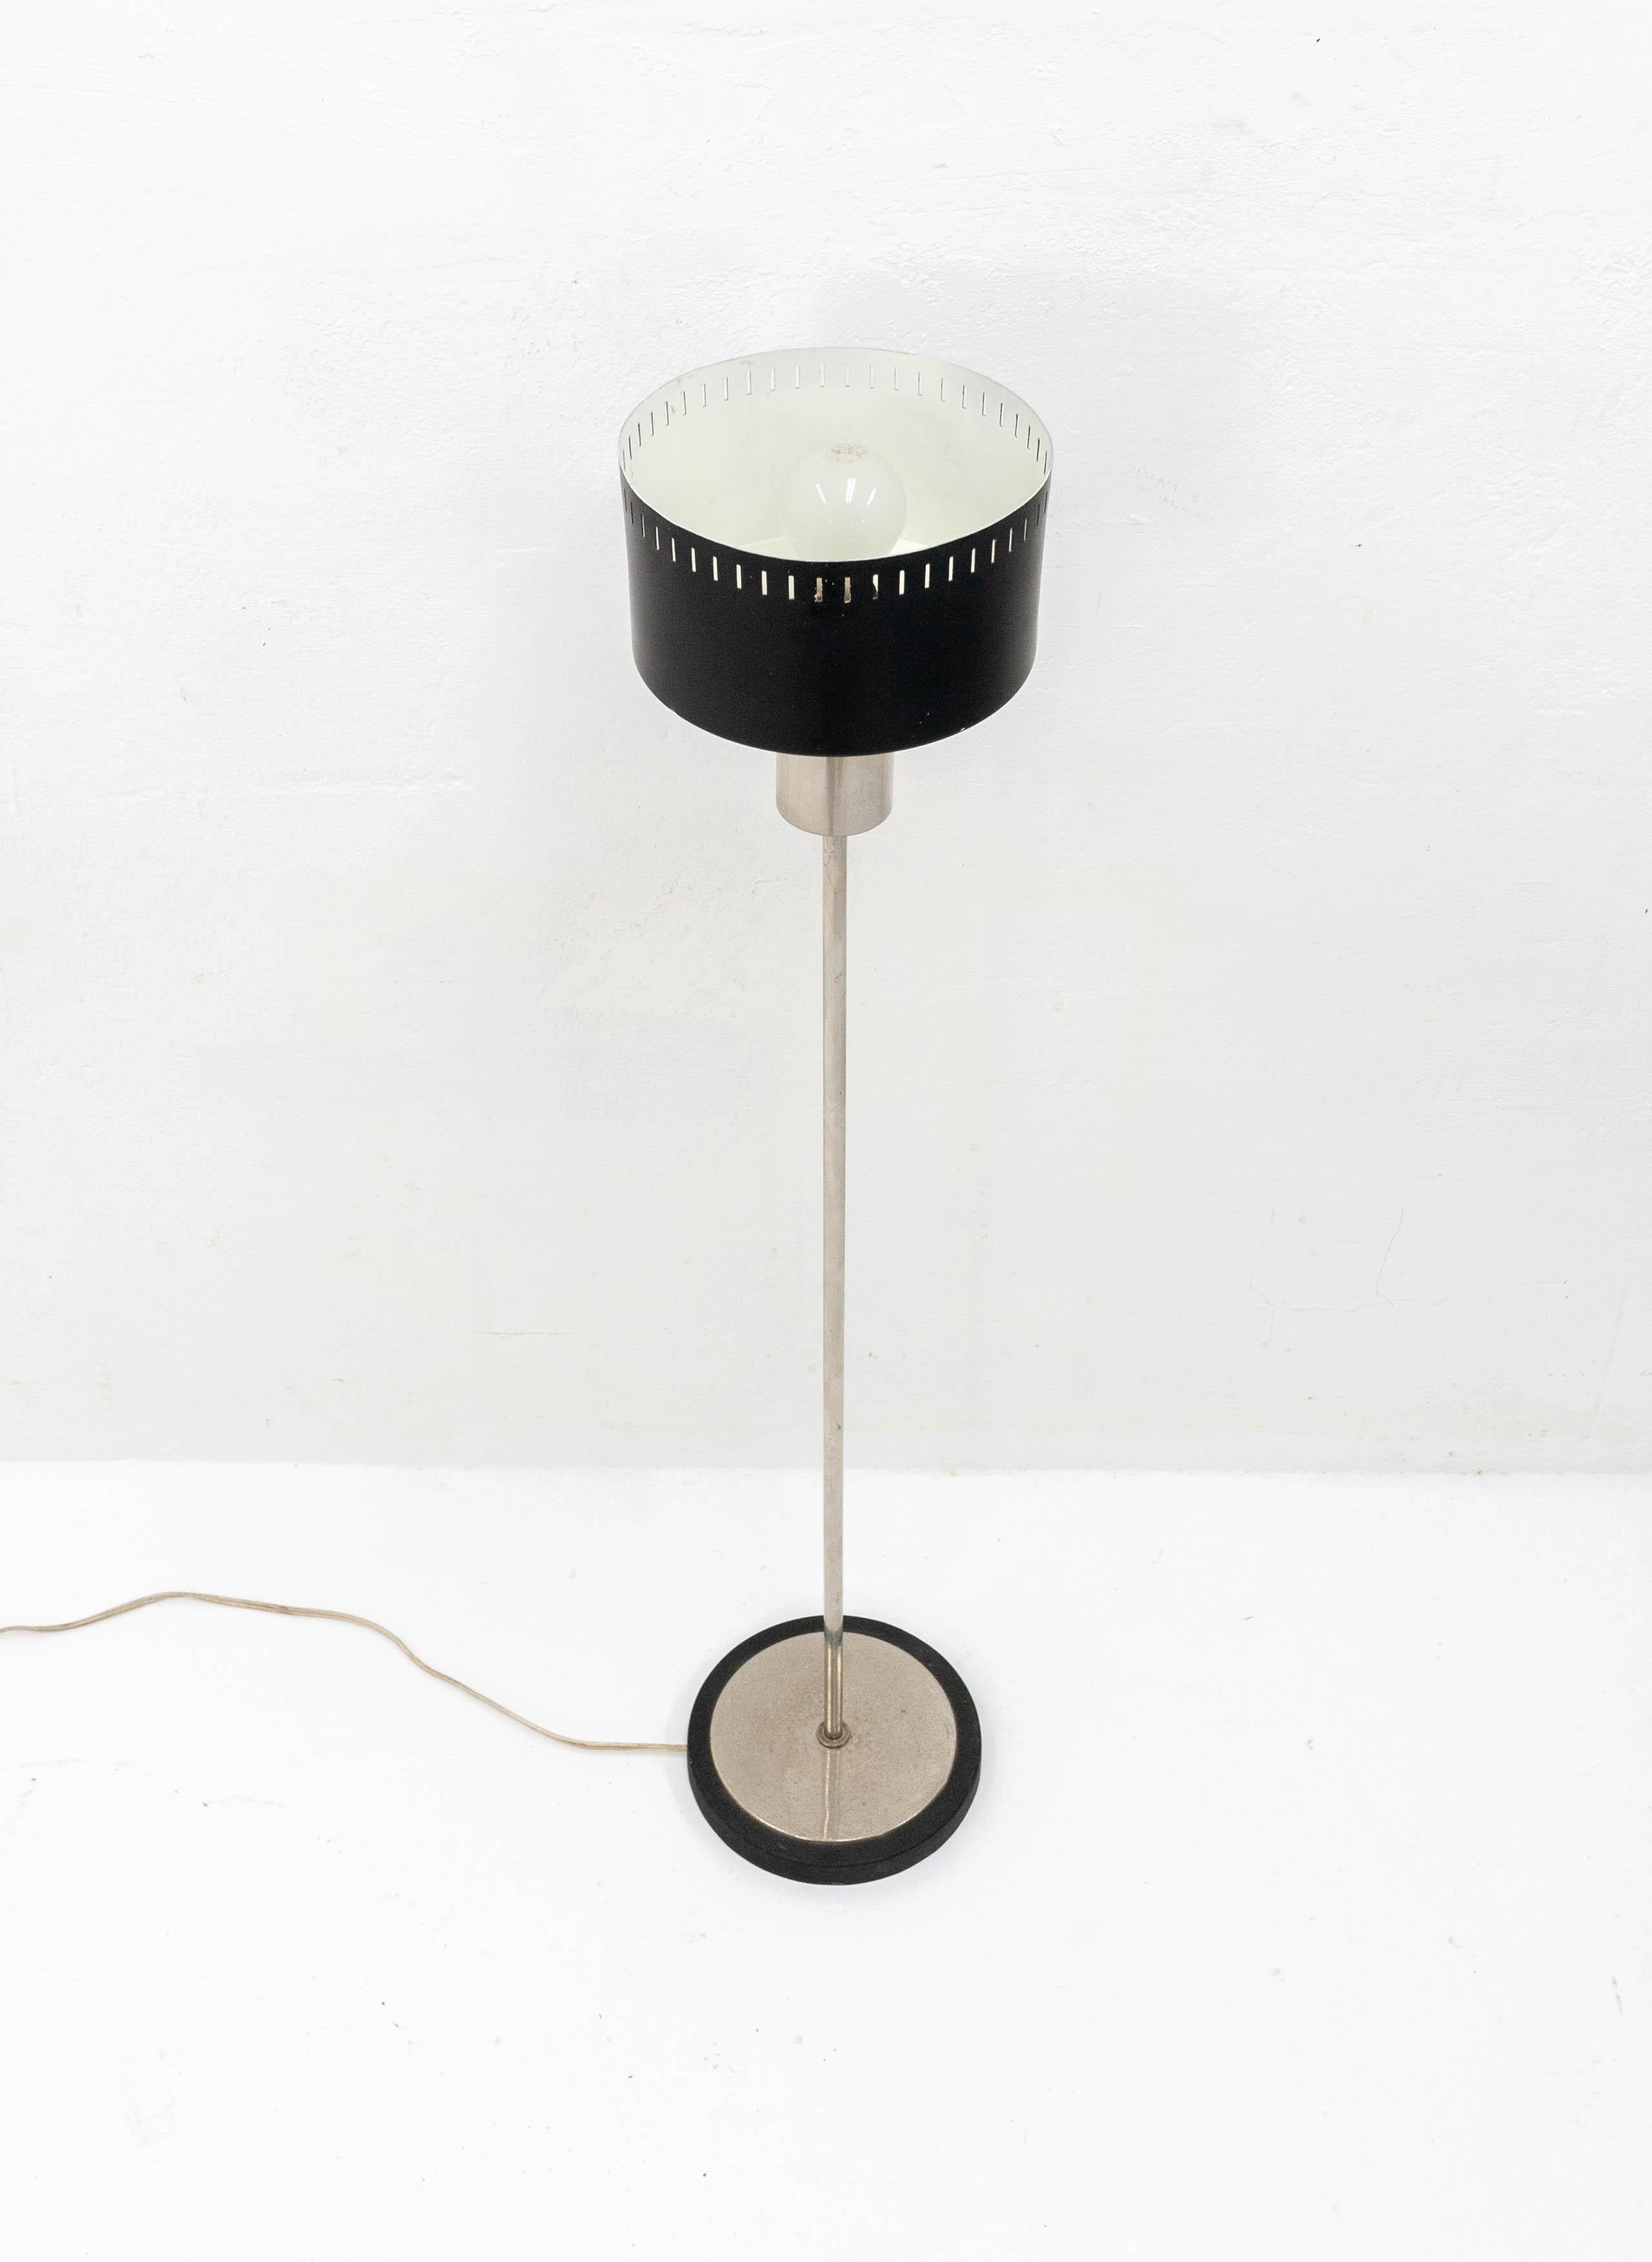 Small elegant floor lamp in a style reminiscent of Stilnovo examples. Chrome base with a black metal lampshade featuring a slotted design. The height makes it suitable for use as a reading lamp next to a chair or desk.